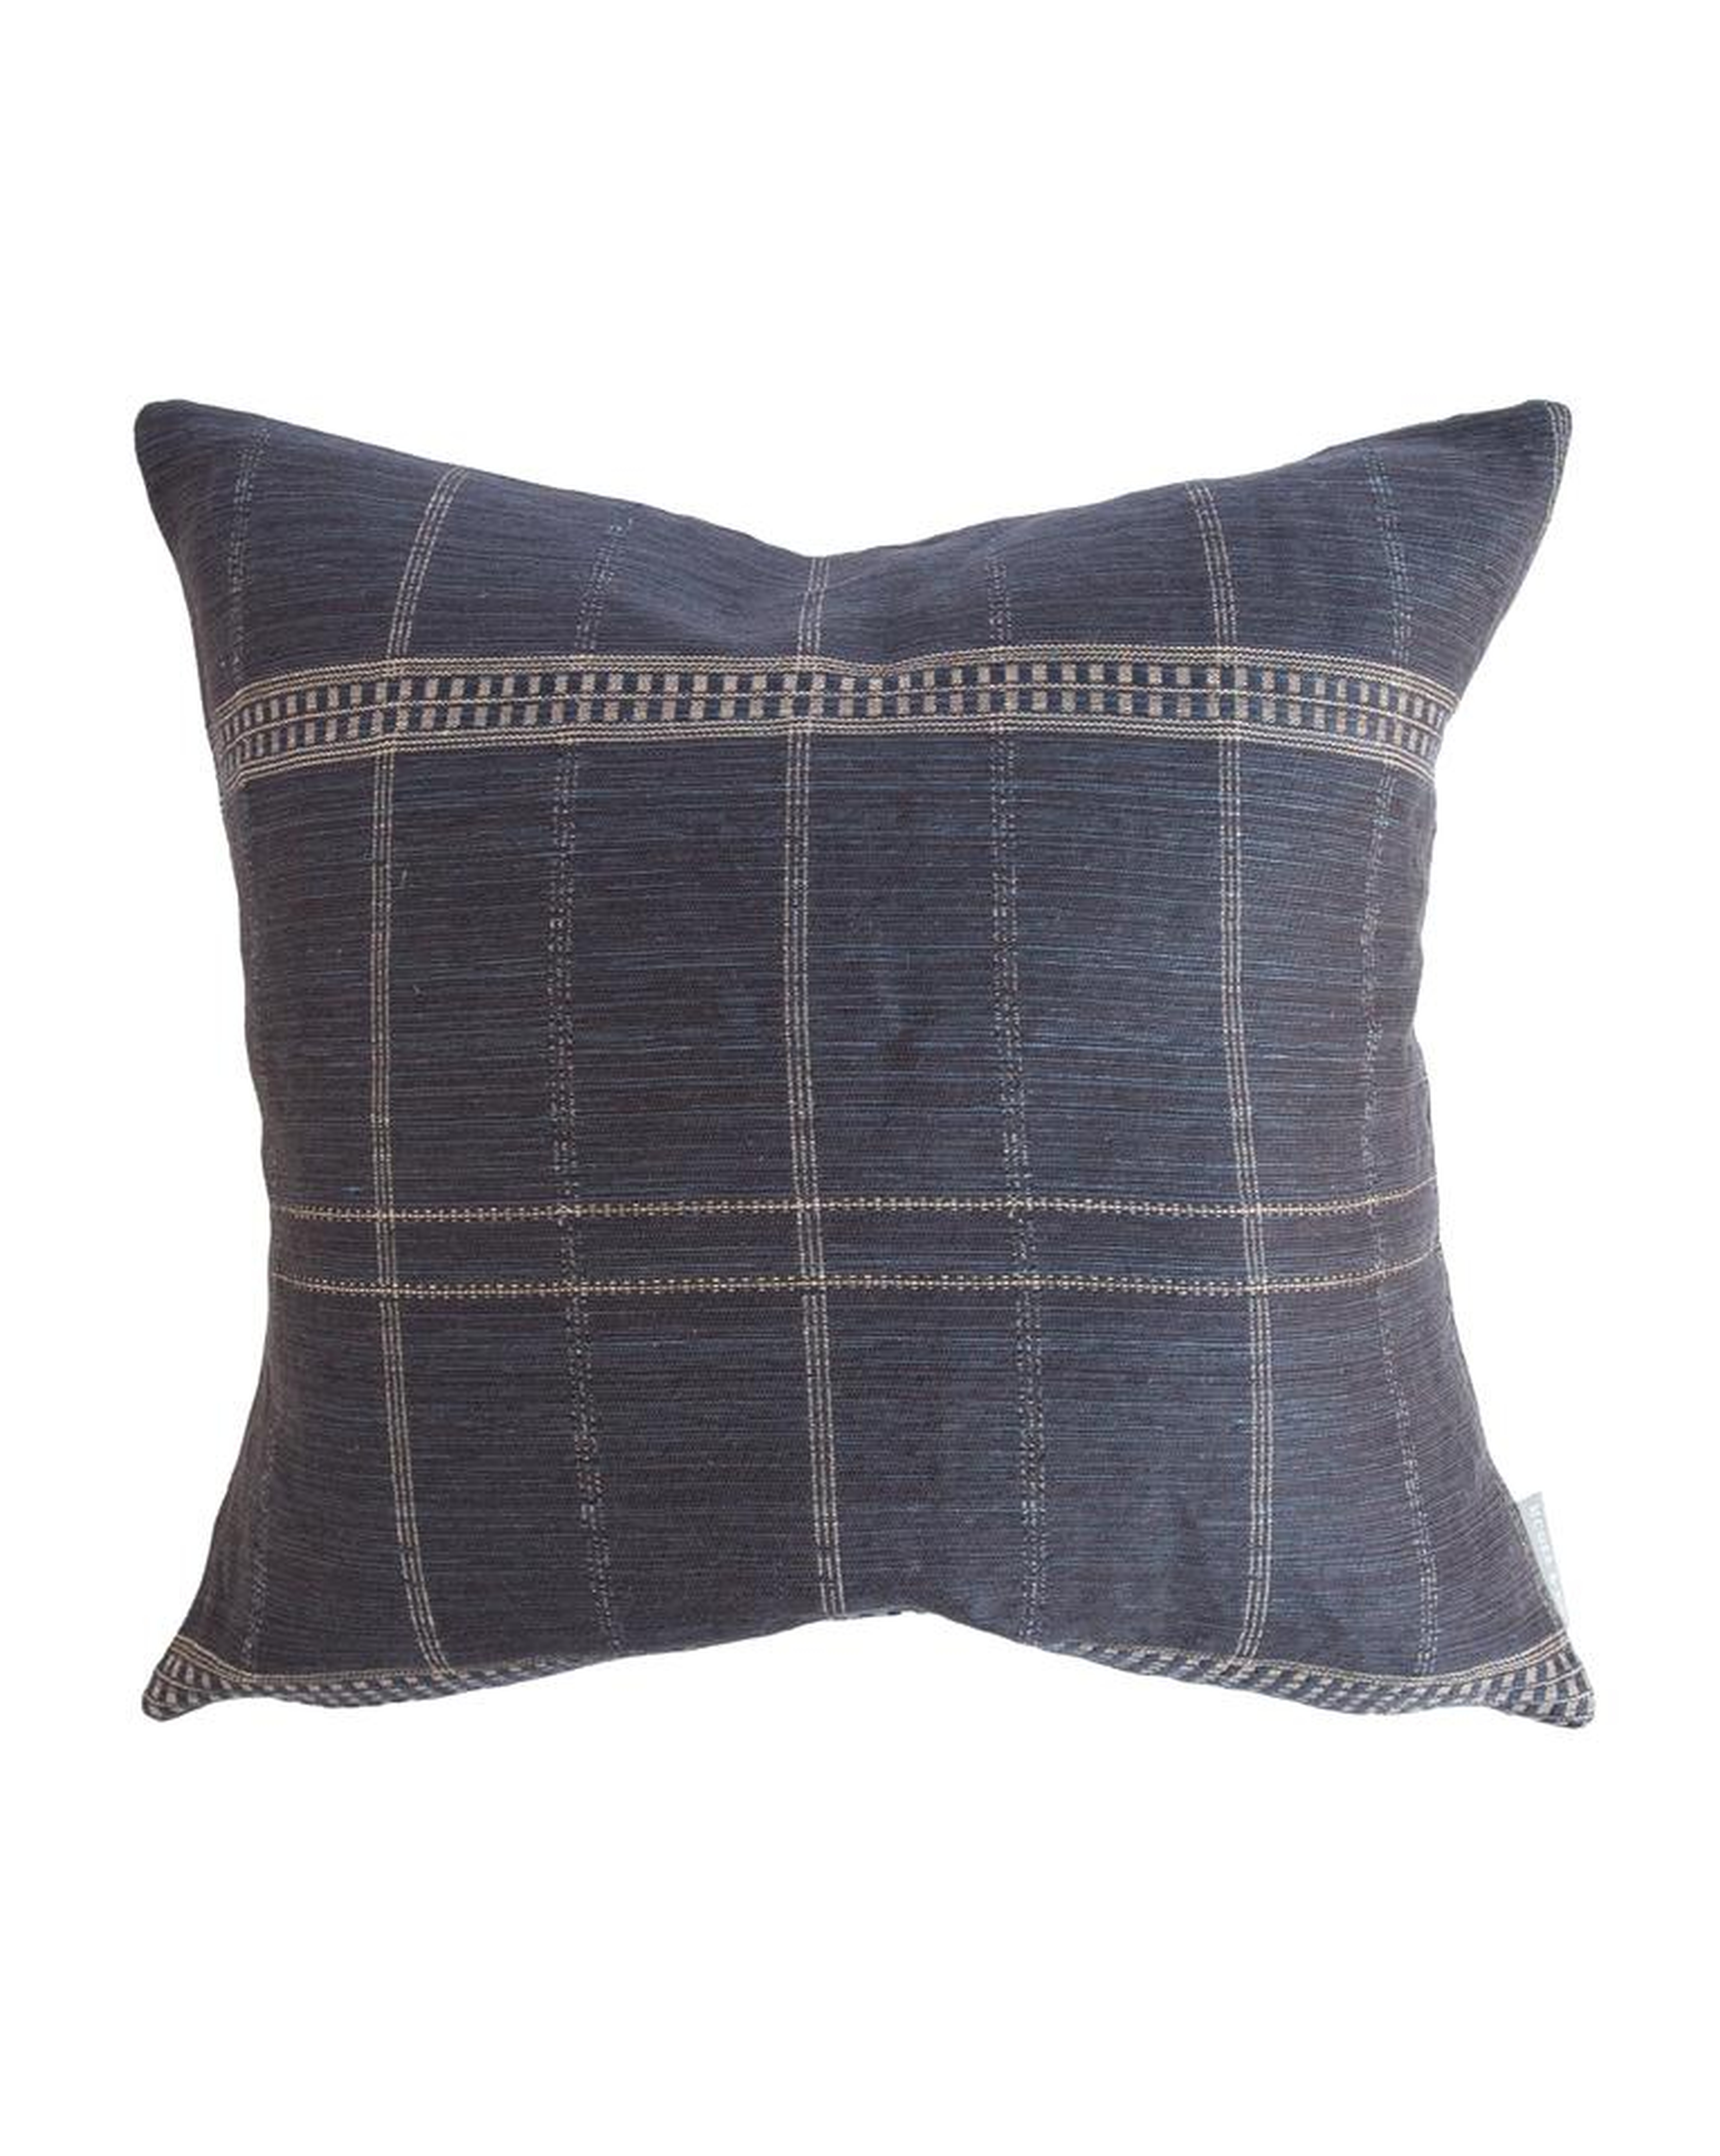 GIBSON PILLOW WITHOUT INSERT, 22" x 22" - McGee & Co.